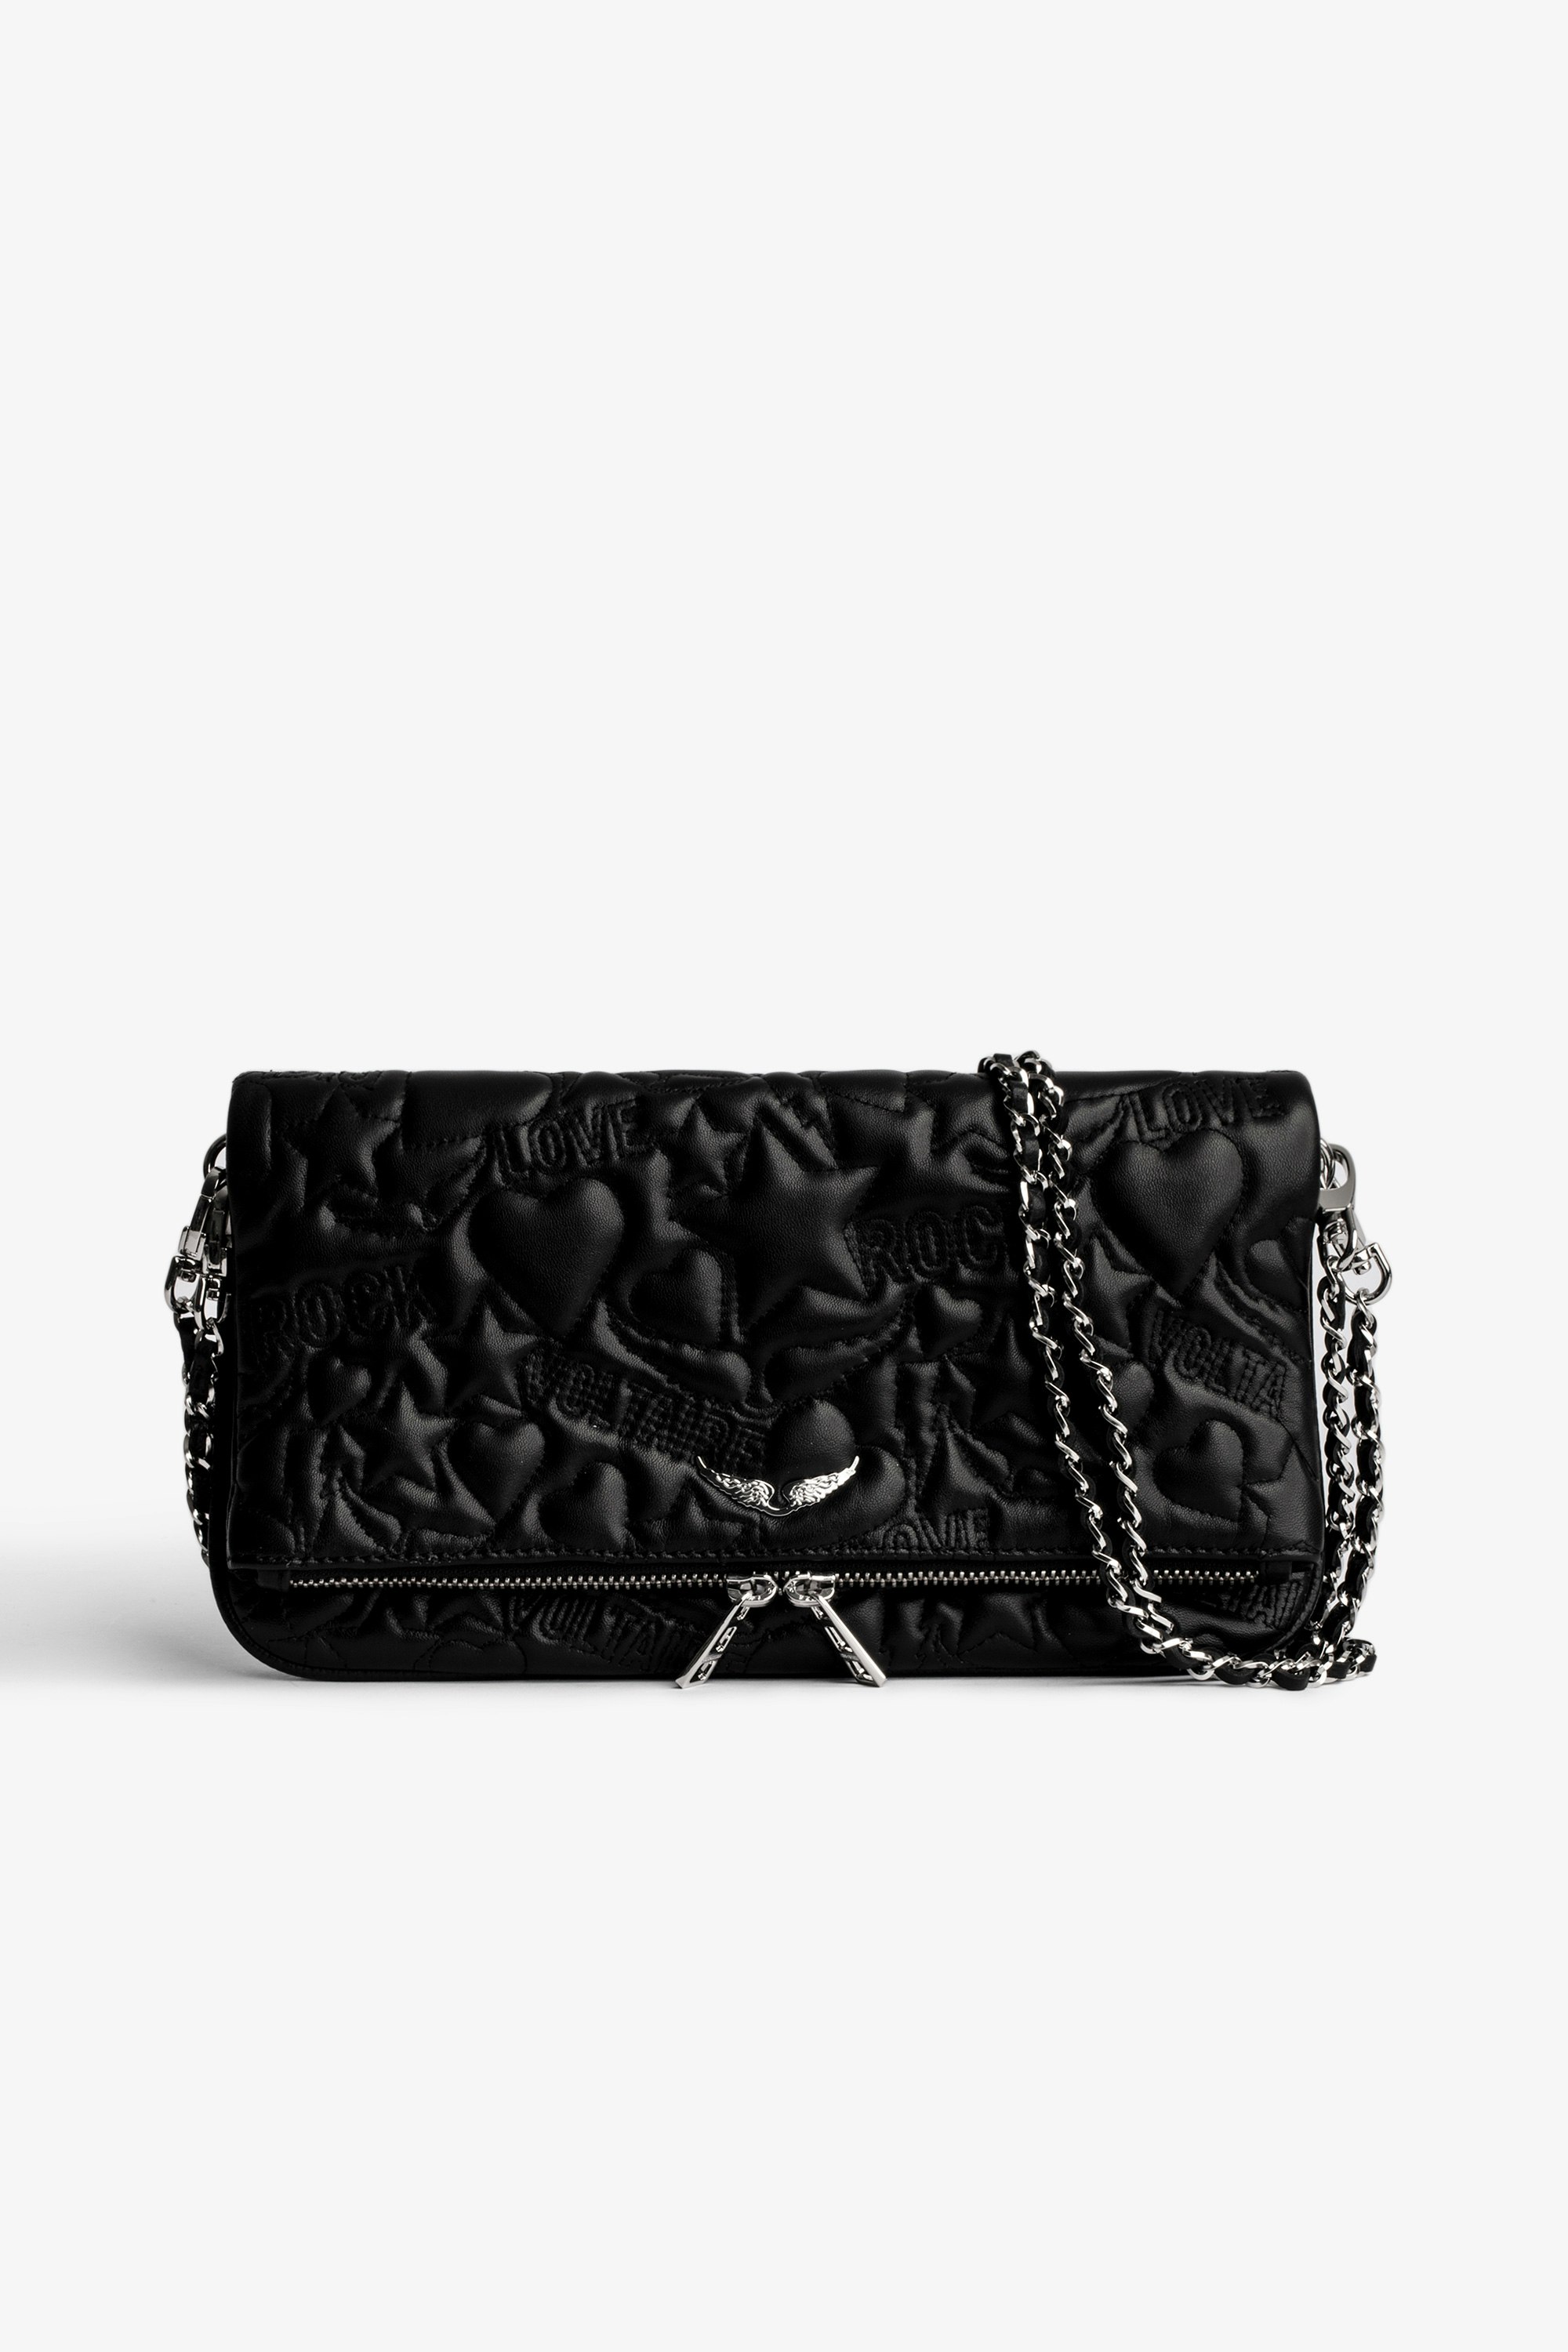 Rock Clutch Women’s black quilted leather clutch bag with topstitched motifs